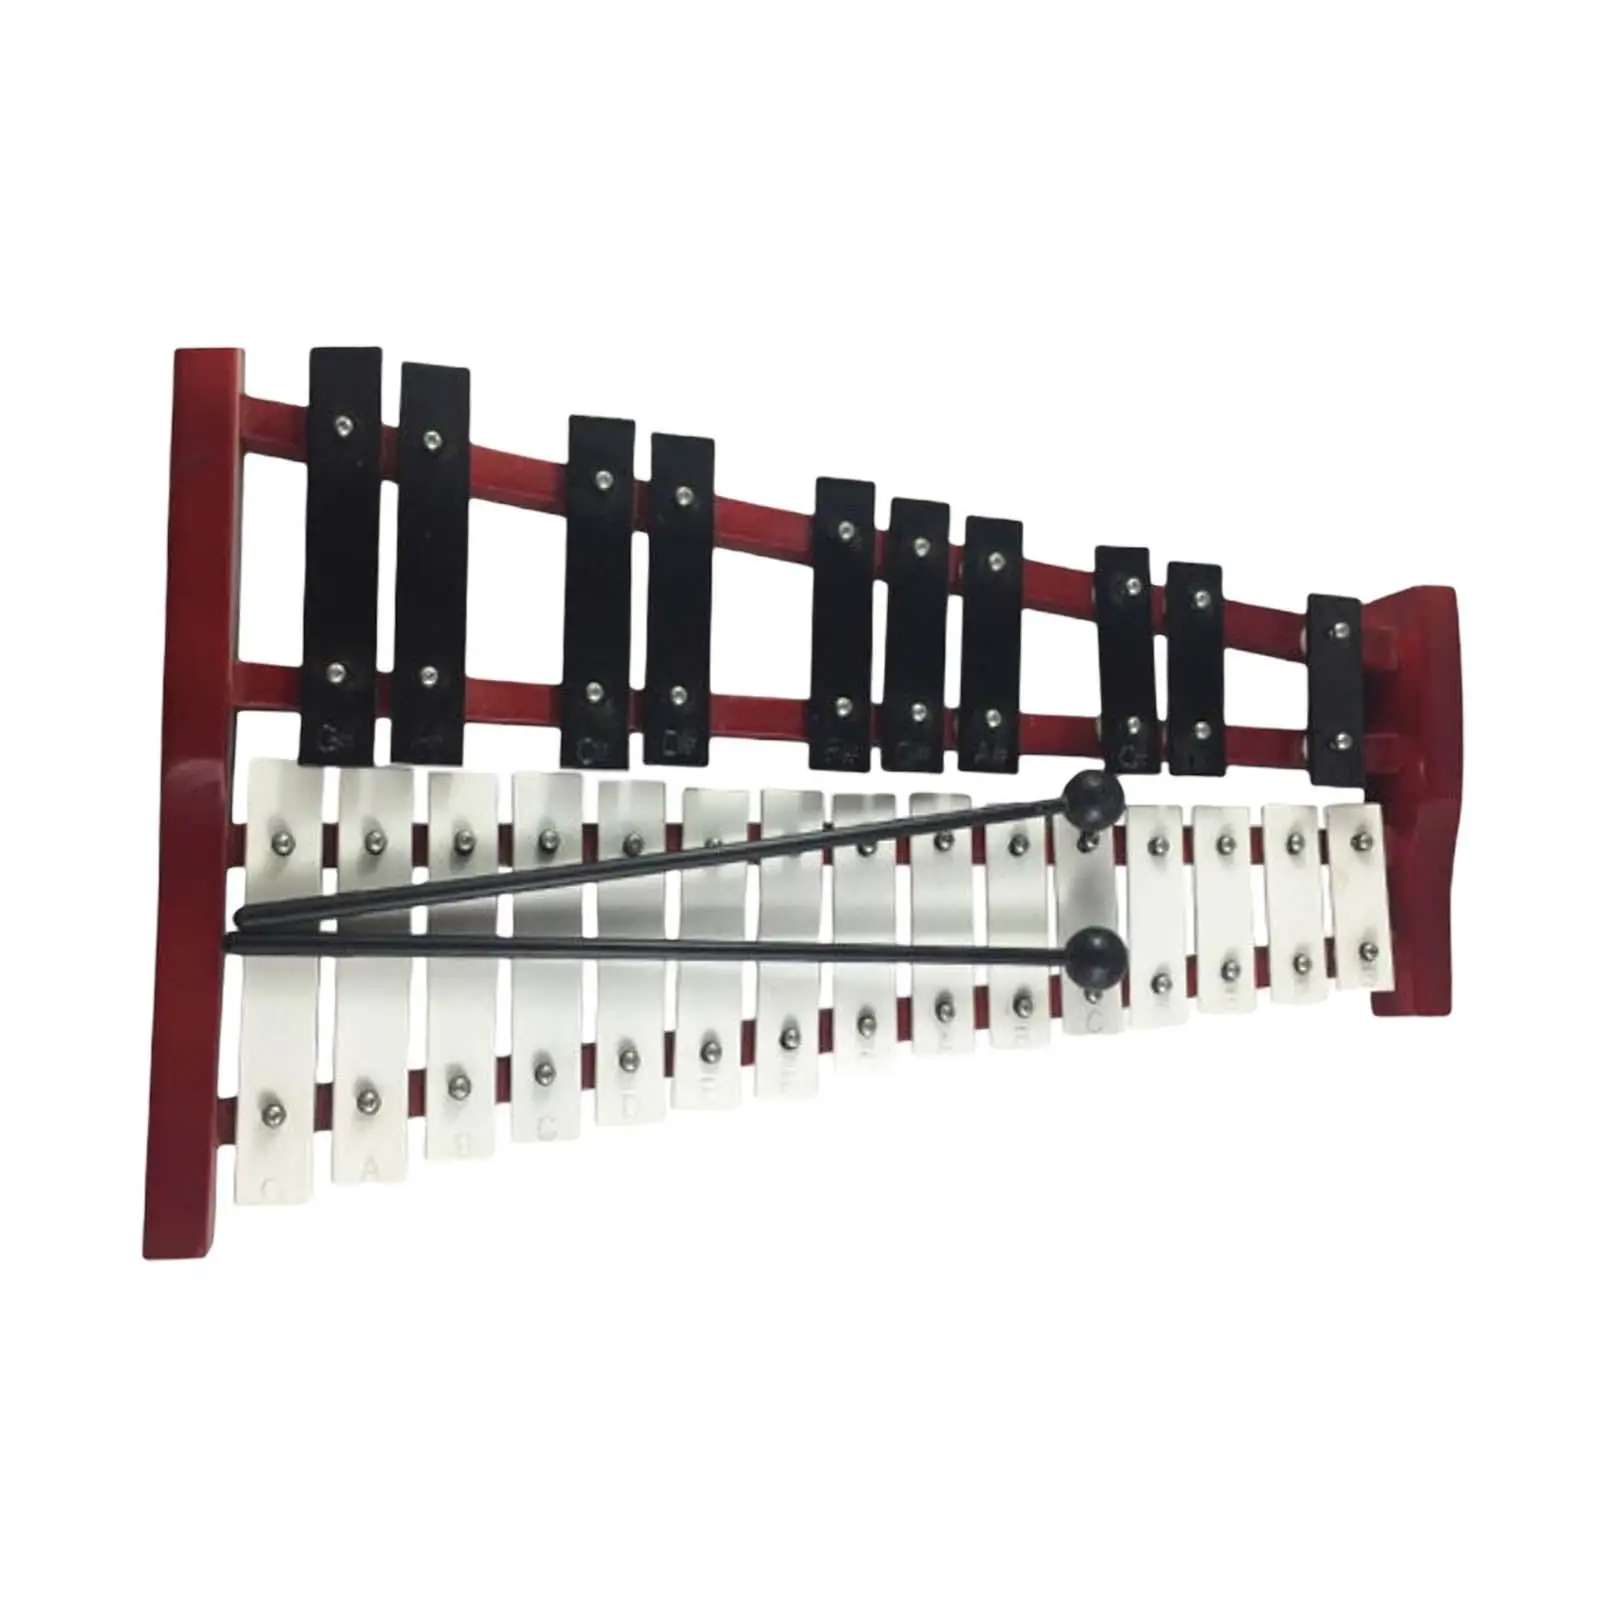 25 Key Glockenspiel Xylophone Exquisite Portable with Clearly Marked Notes Aluminum Bars